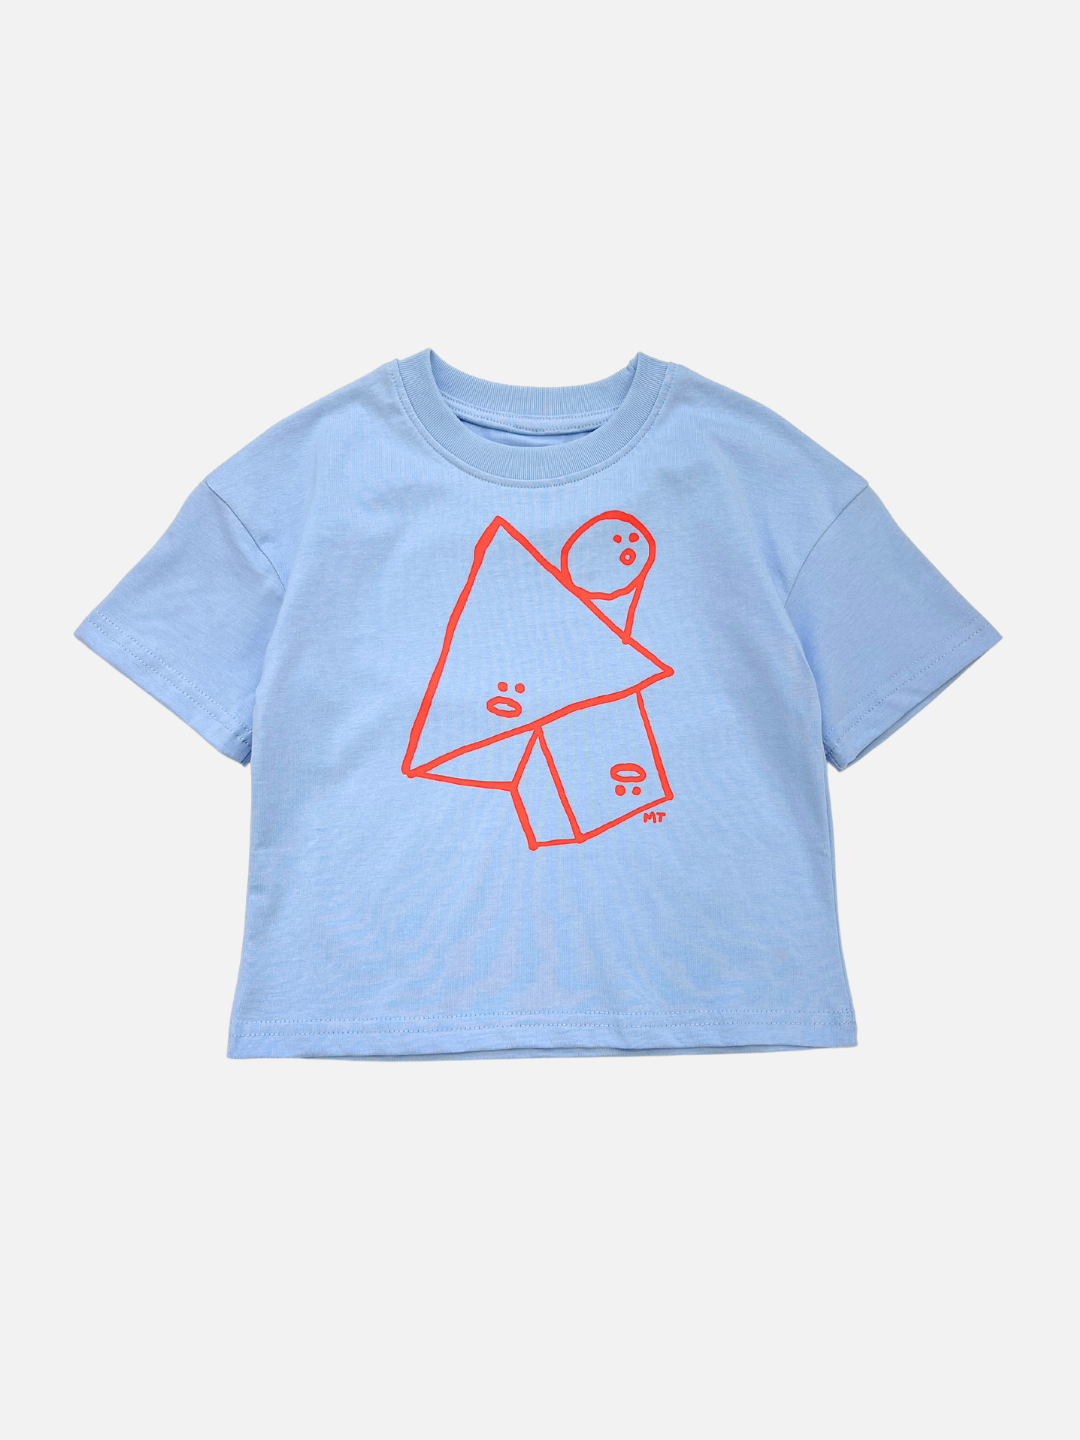 A front view of the kids' Jumble Tee with red shapes outline with funny faces in the center.